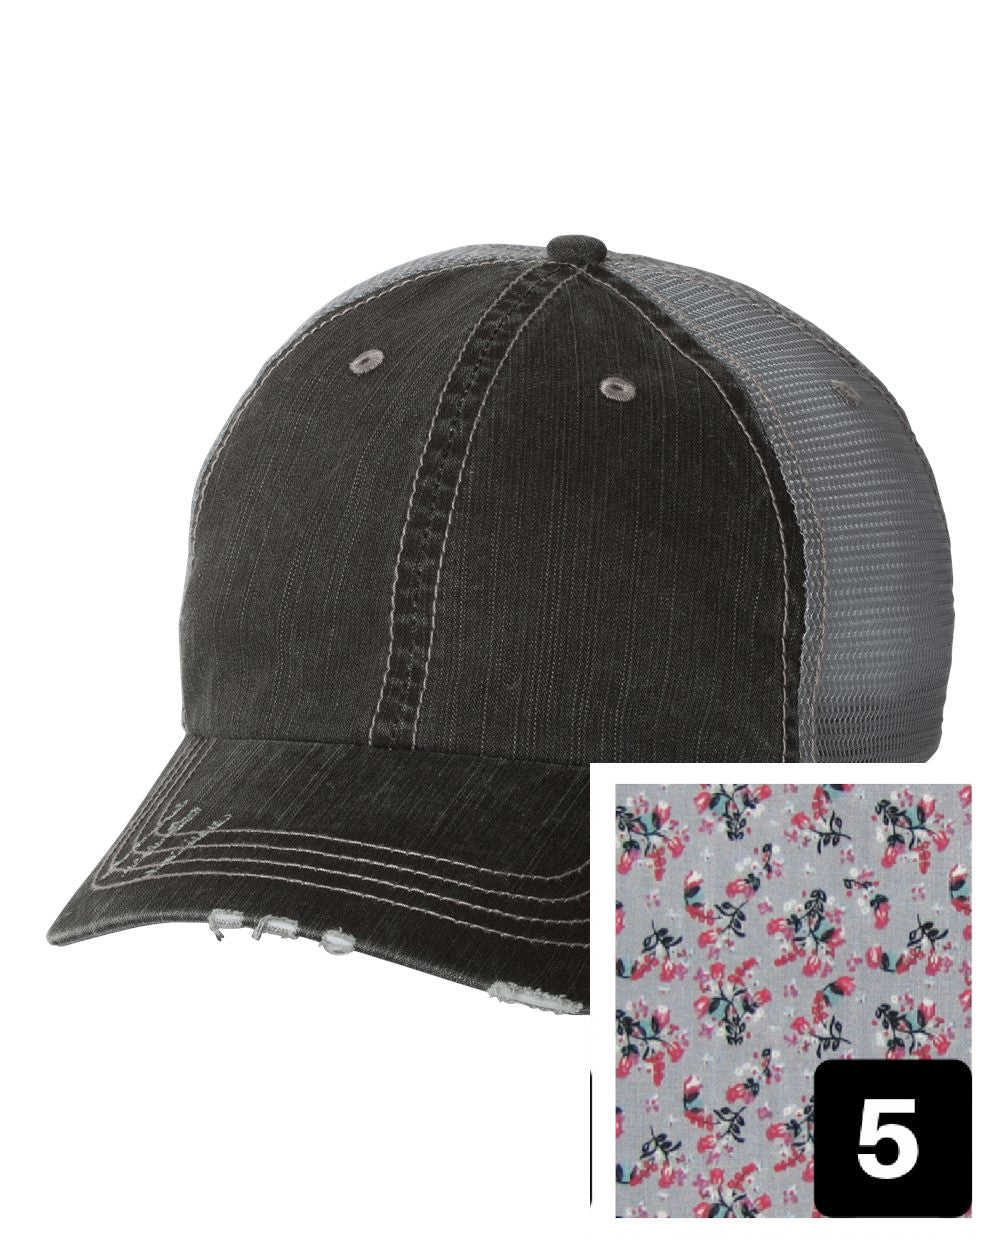 gray distressed trucker hat with purple and pink floral fabric state of West Virginia